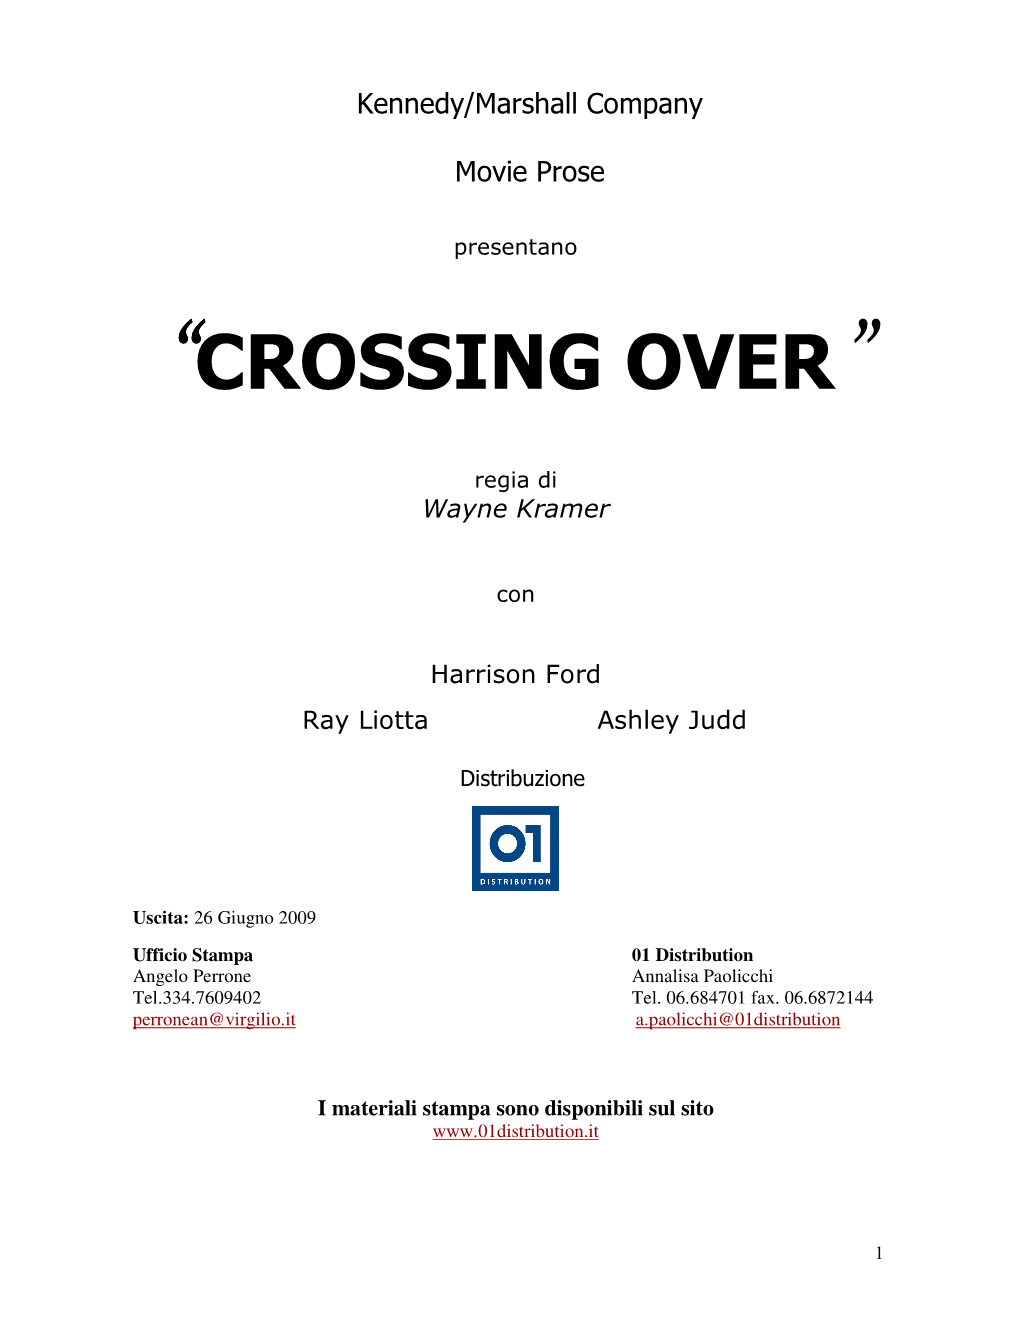 “Crossing Over”